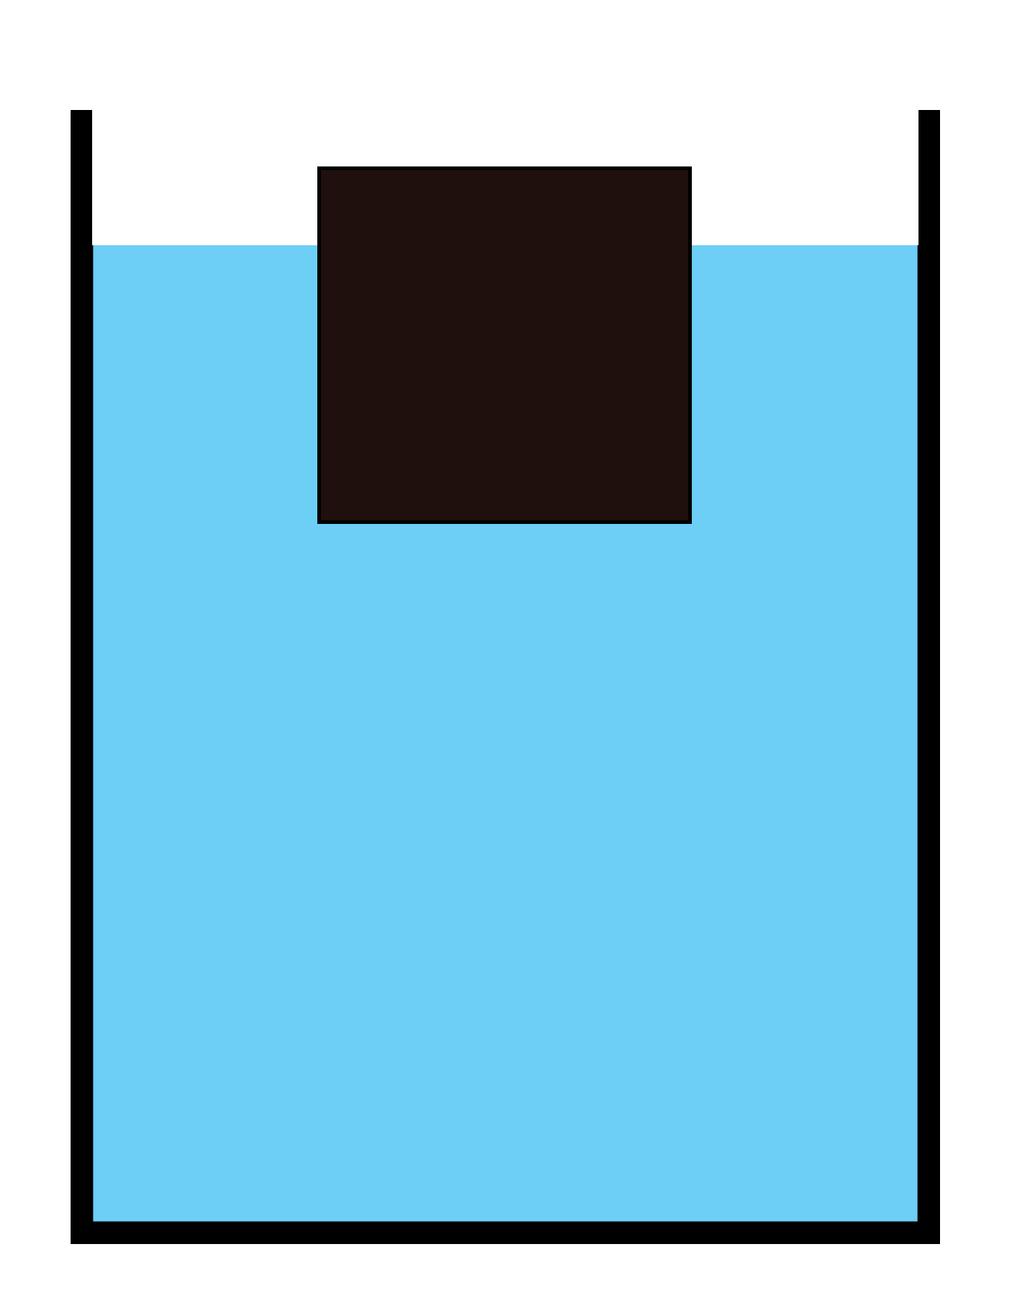 A cube of side 2m has relative density 0.8 and is placed in water. How high is its top face above the water? The following is a visualisation of the situation.